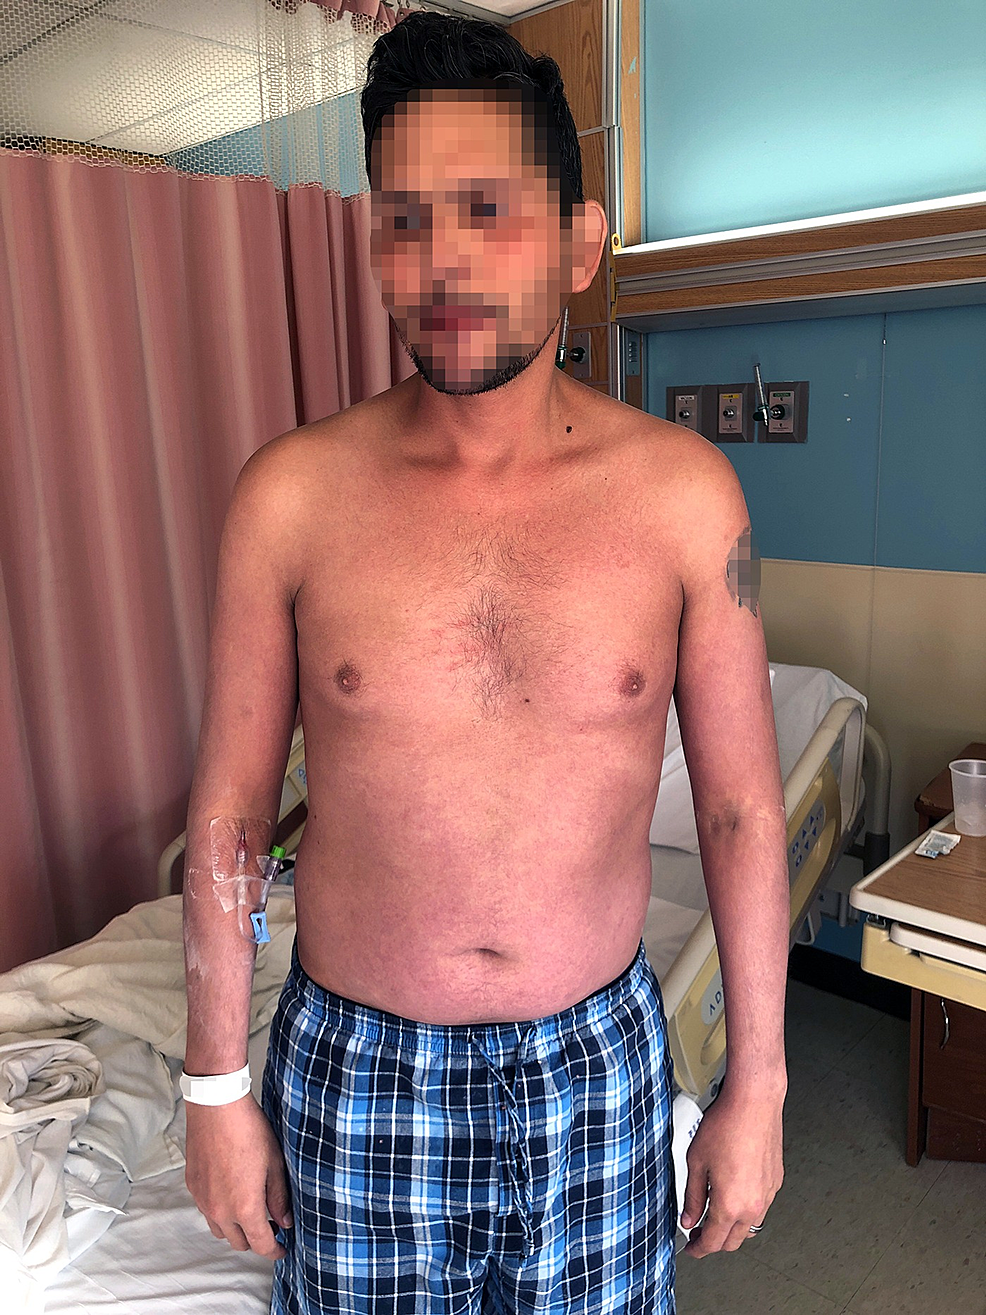 New-erythematous-maculopapular-rash-on-the-face,-bilateral-arms,-chest,-and-abdomen.